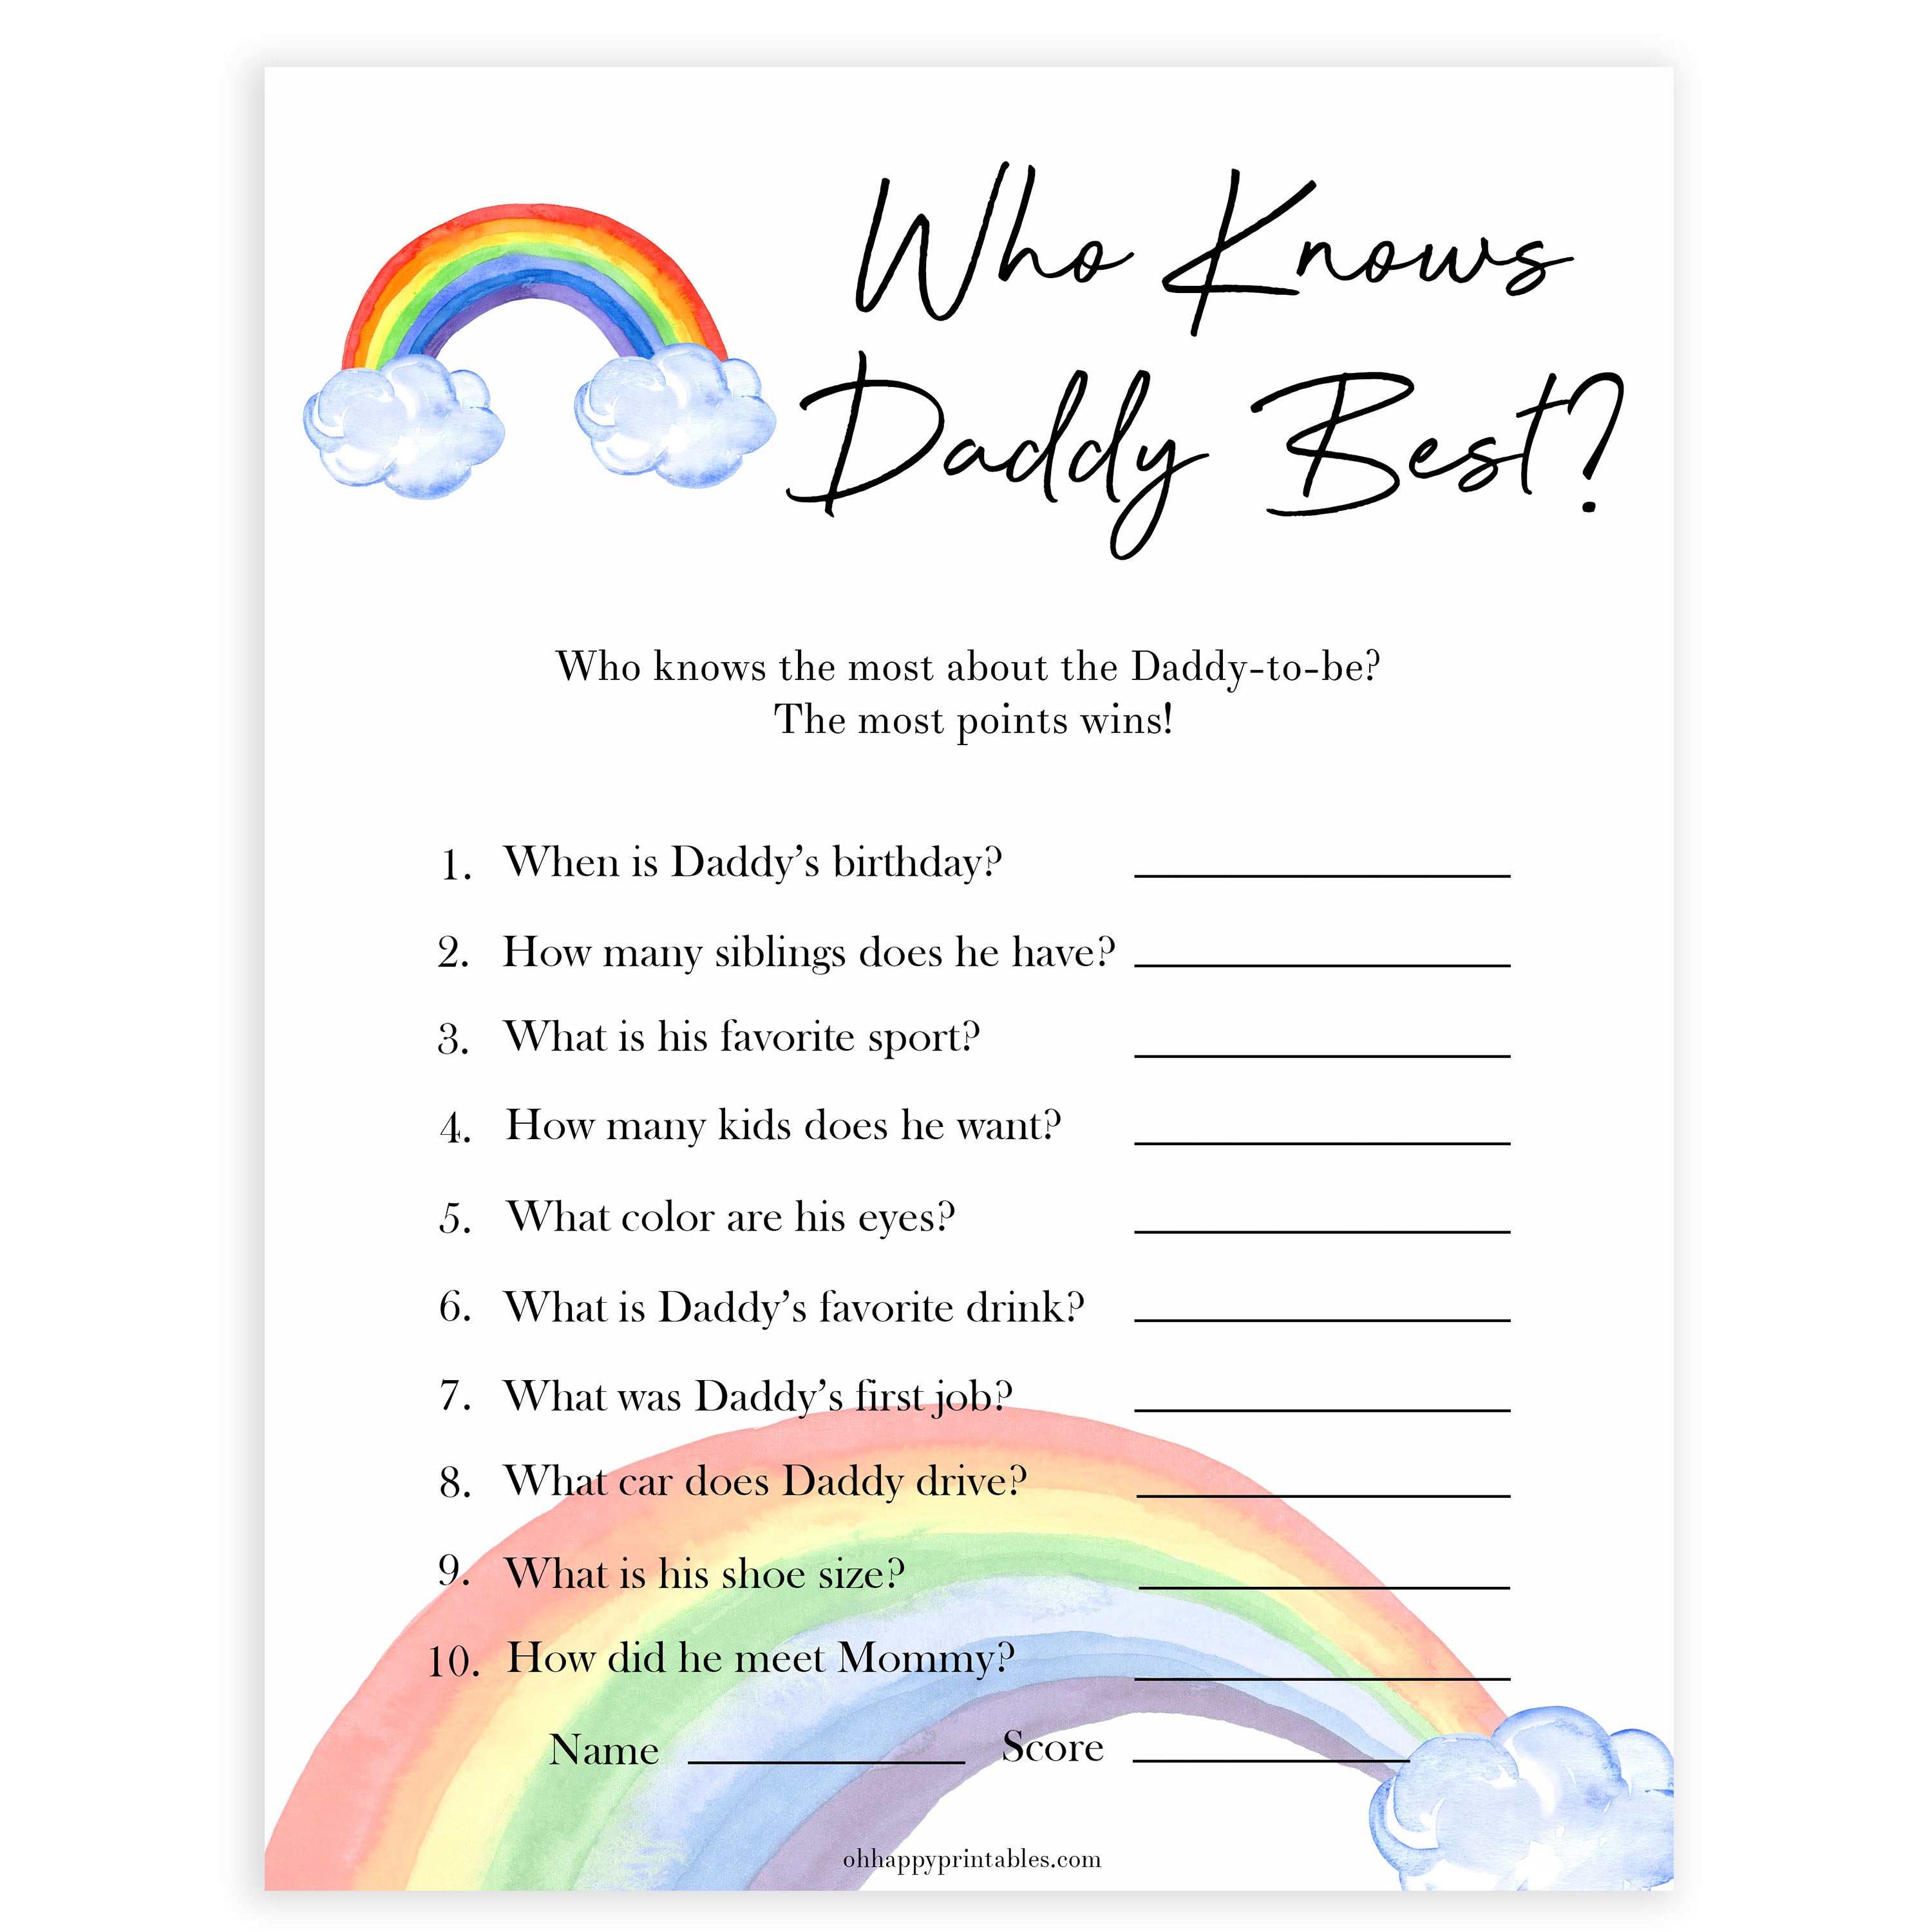 Rainbow baby games, rainbow who knows daddy best, rainbow printable baby games, instant download games, rainbow baby shower, printable baby games, fun baby games, popular baby games, top 10 baby games